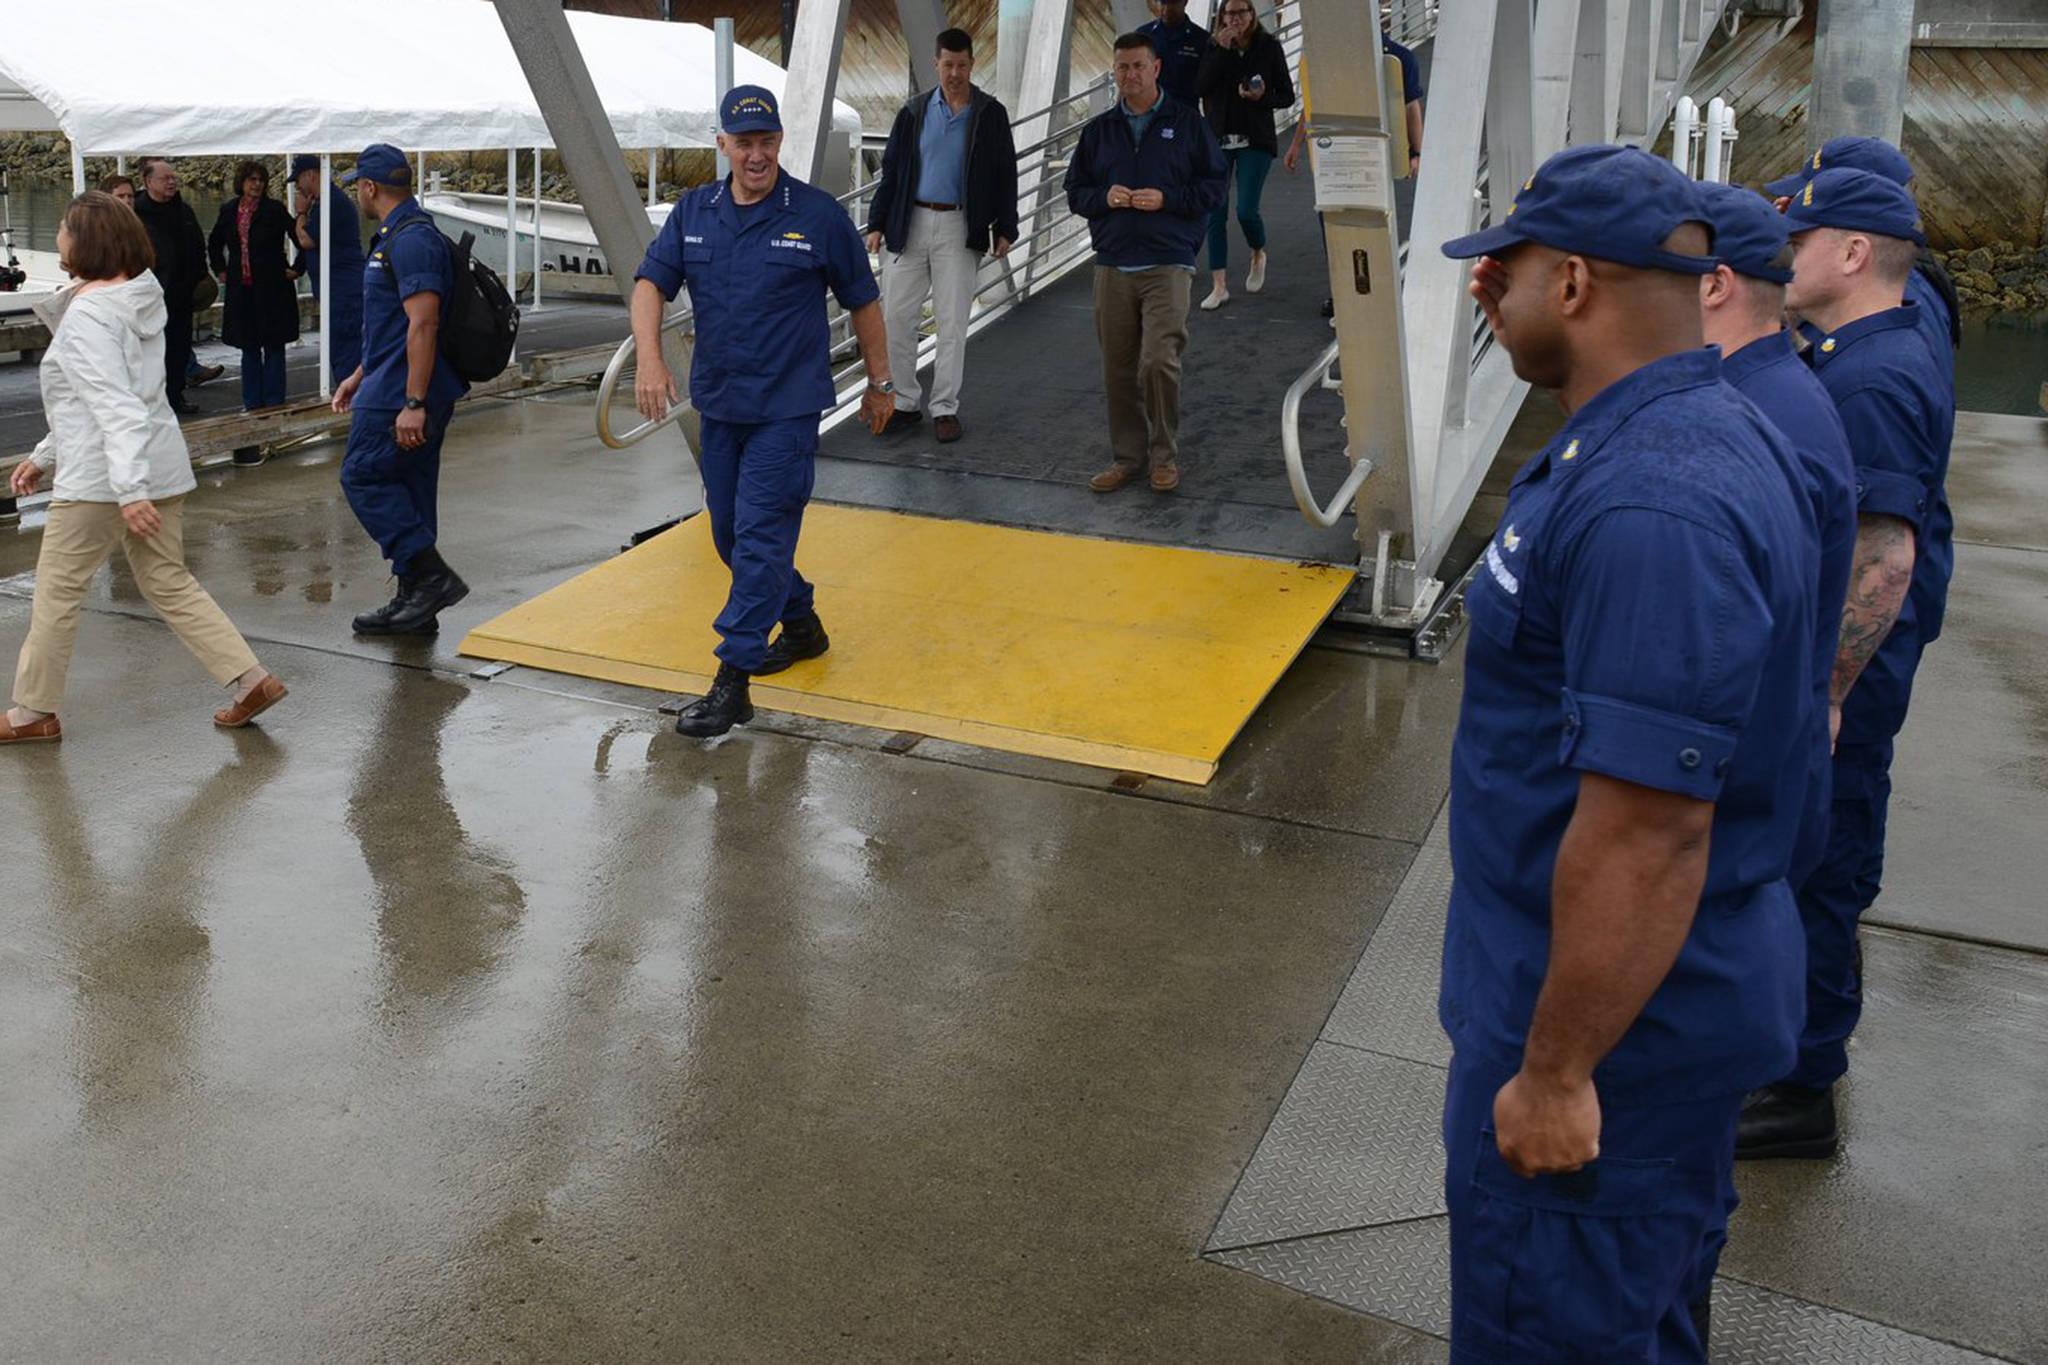 Commandant of the Coast Guard Adm. Karl Schultz visited USCG Station Juneau with members of the U.S. House of Representatives, July 29, 2019. (USCG Photo | PAC Matthew Schofield)